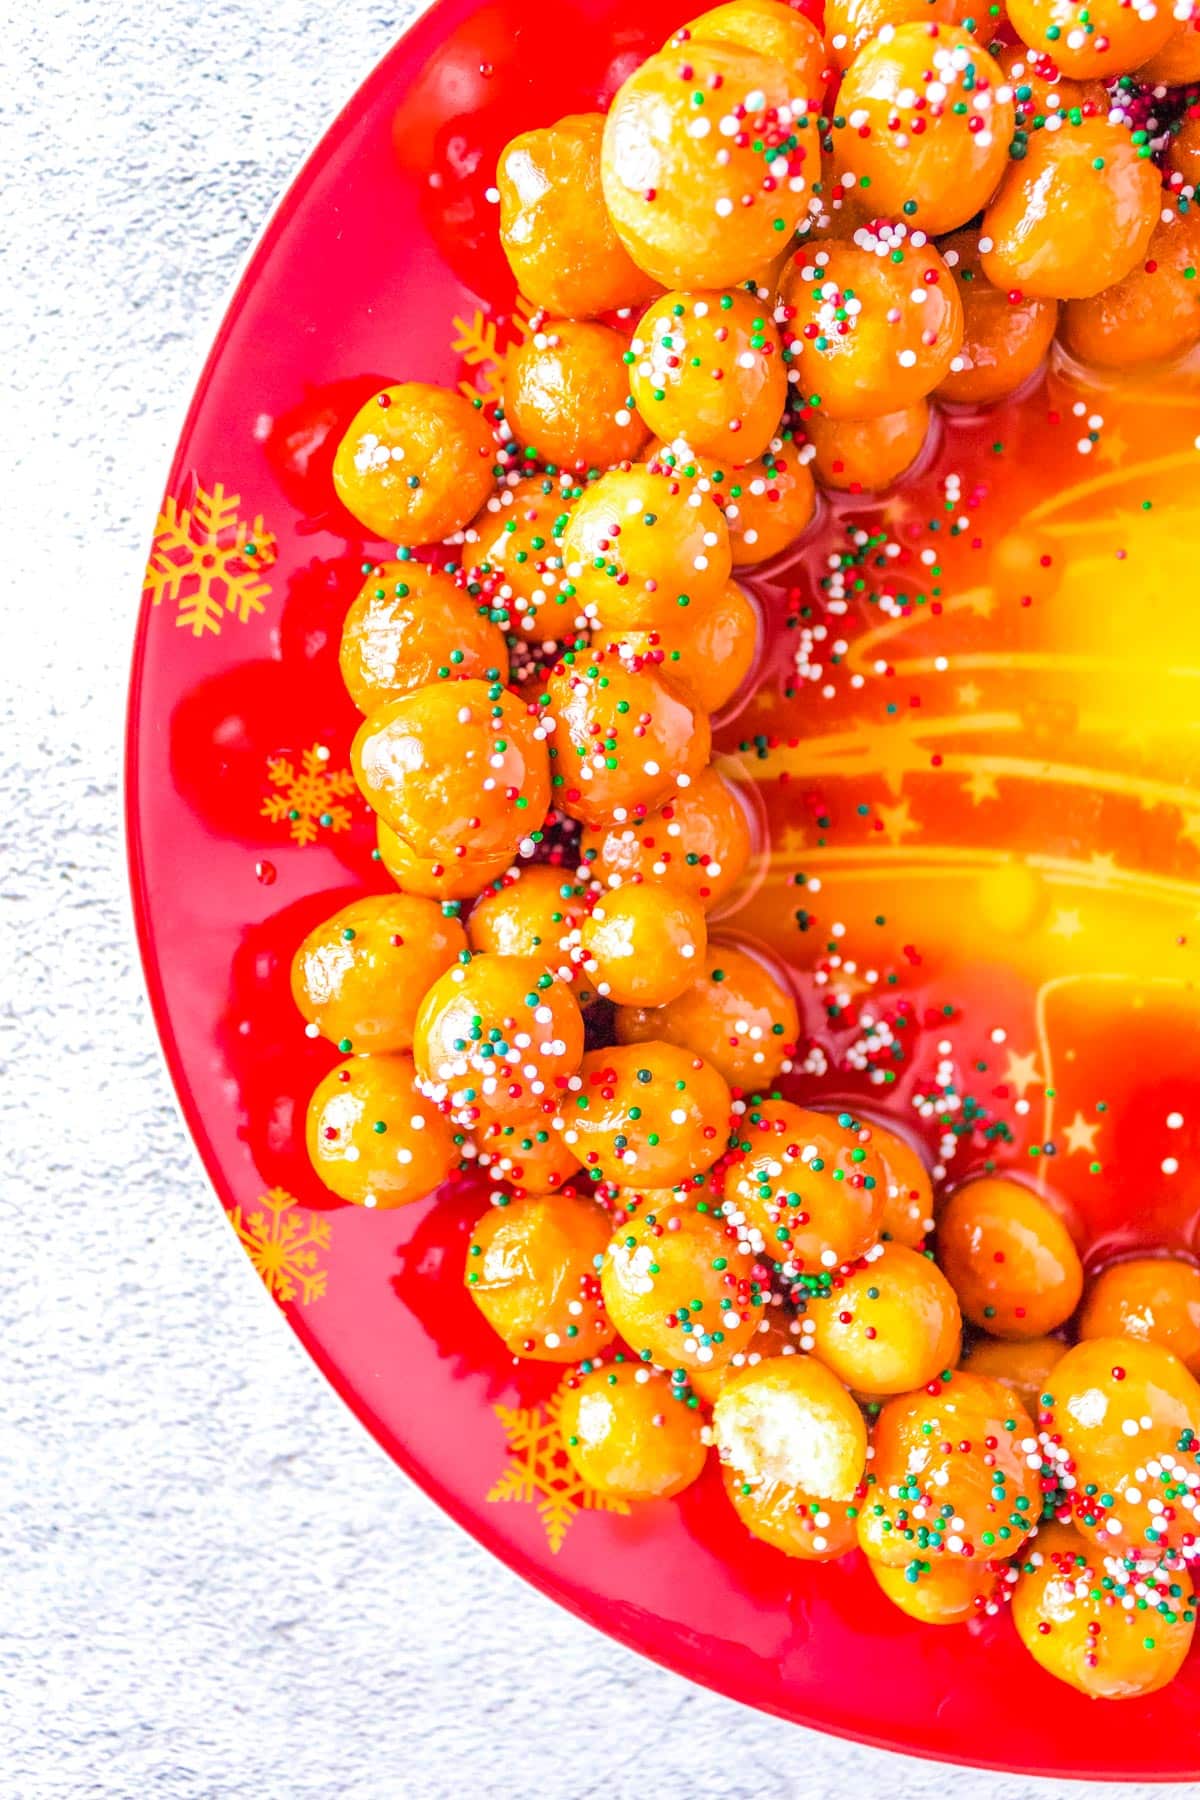 The finished Italian Struffoli on a plate and covered in sprinkles.